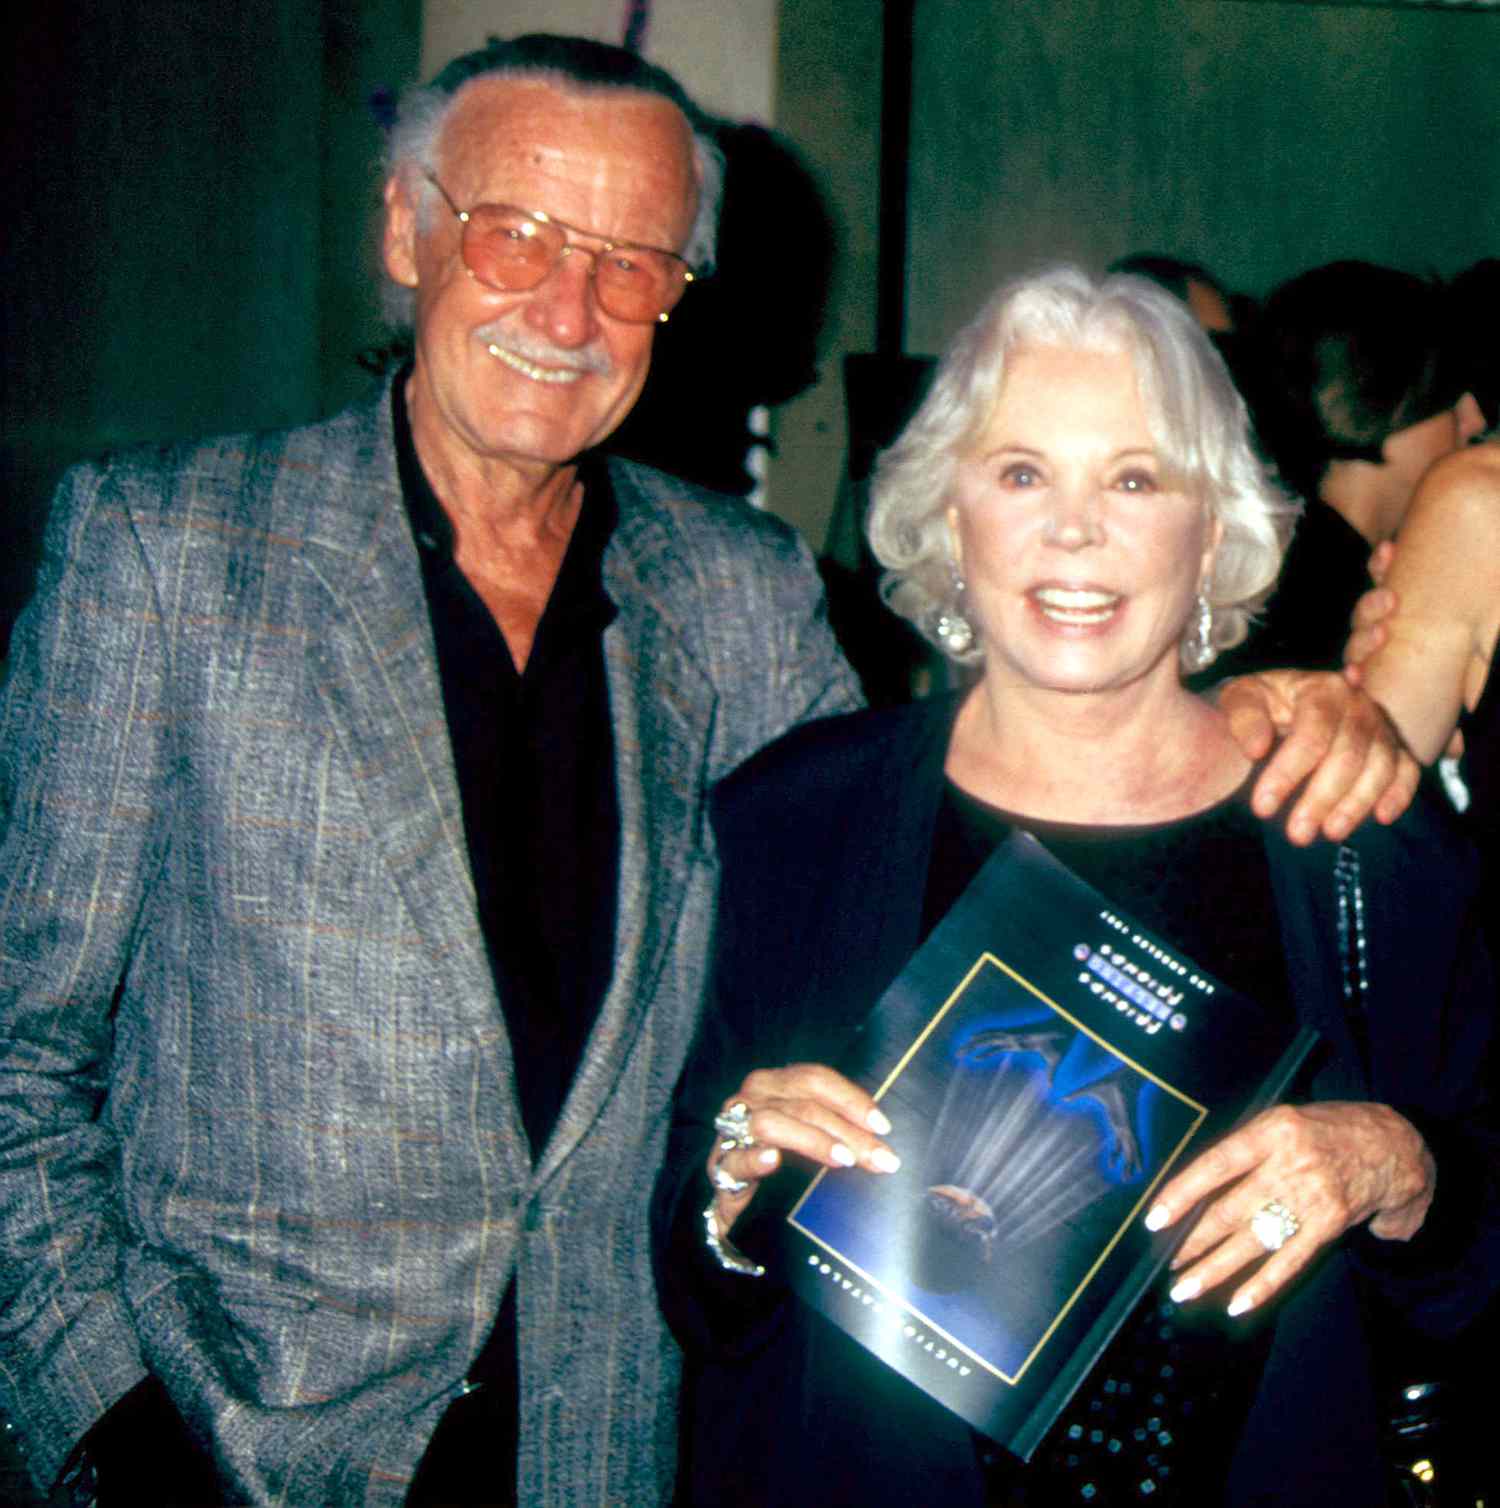 Stan Lee's Wife Joan Boocock Lee Biography: Net Worth, Children, Age, Movies, Birthday, Wikipedia, Death